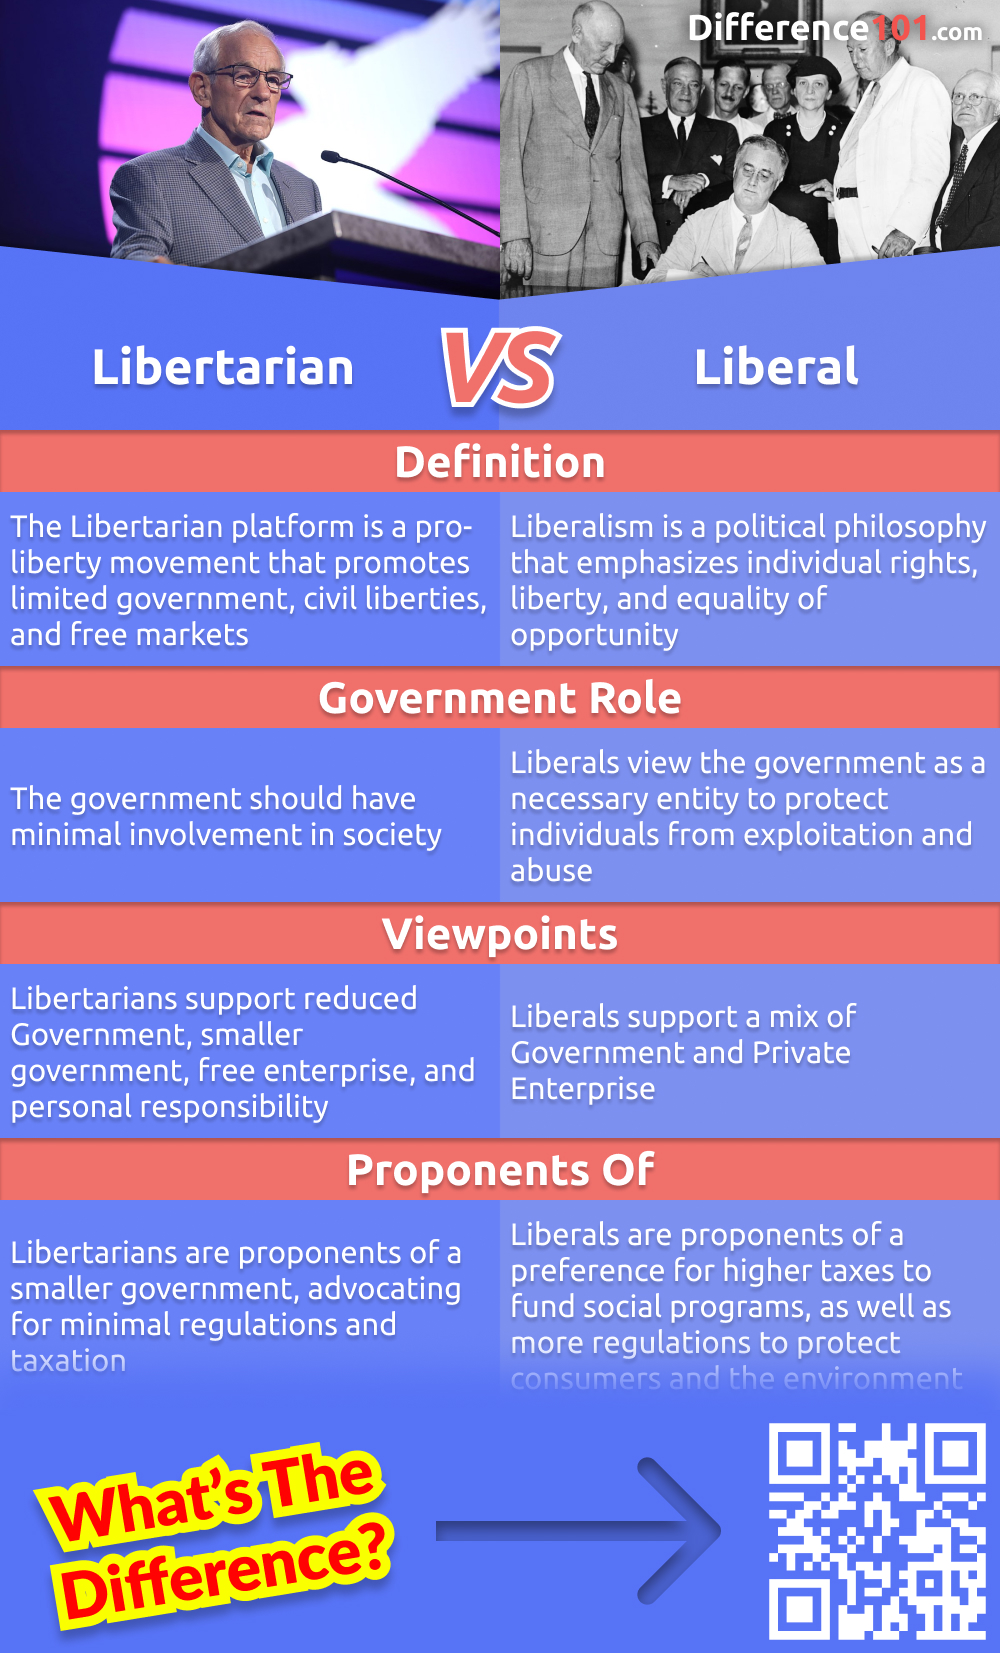 What are the key differences between Libertarians and Liberals? What are the pros and cons of each political philosophy? Learn more about the key distinctions between these two ideologies.